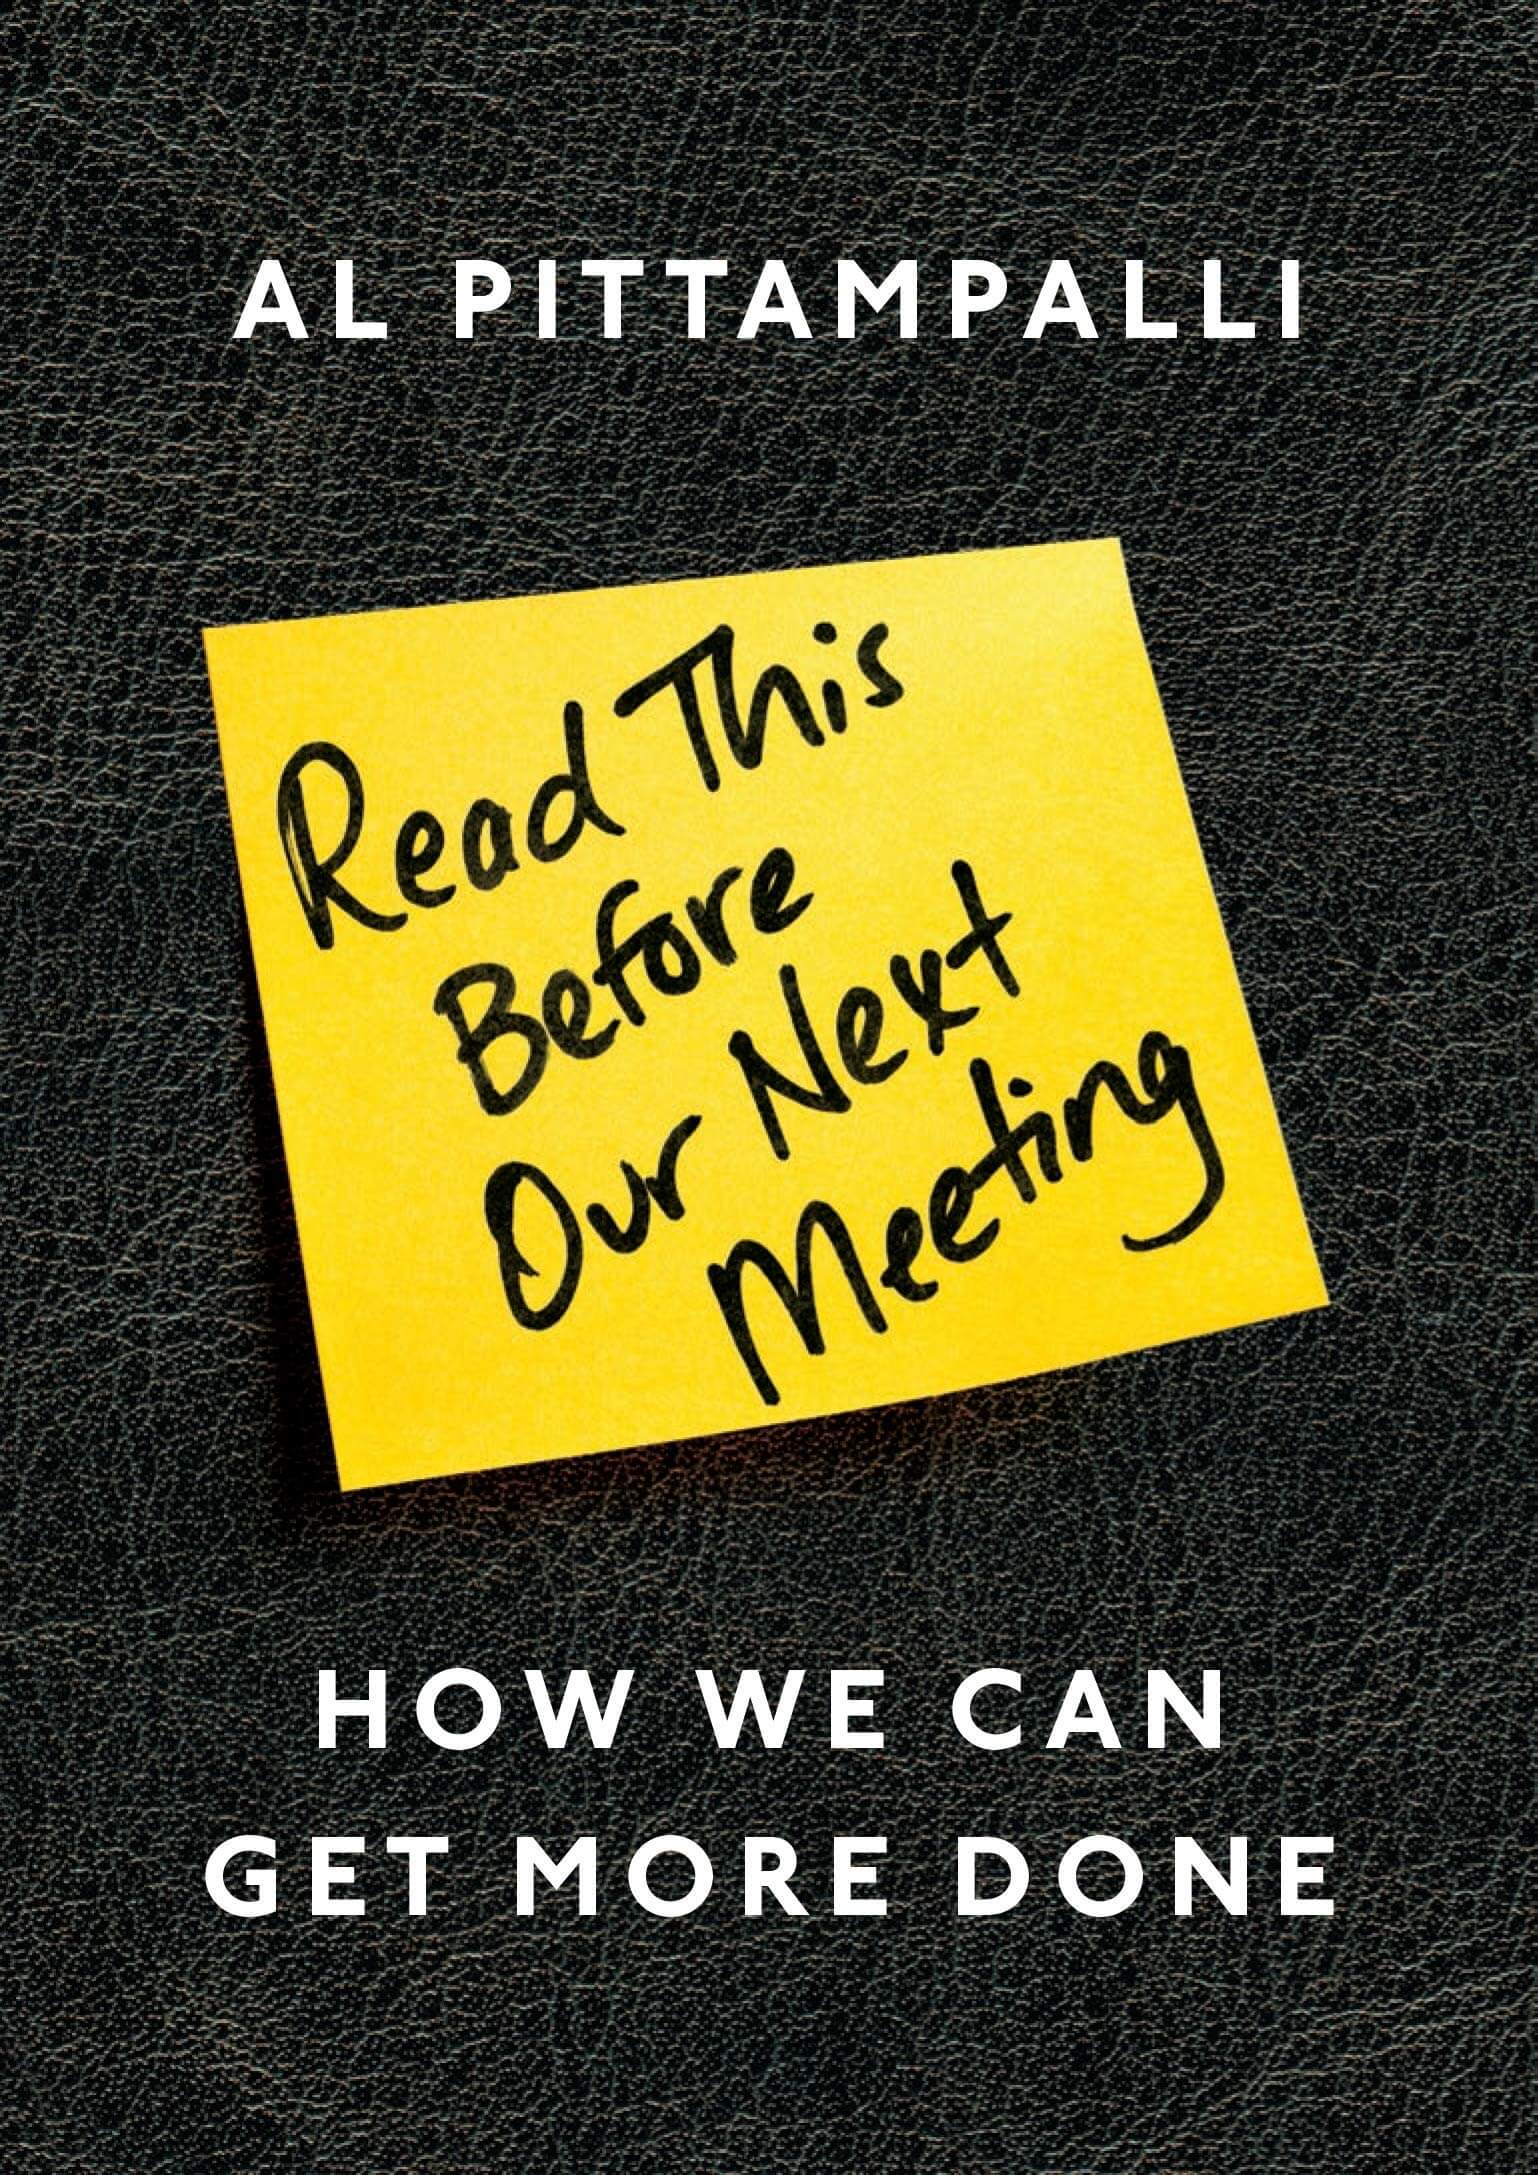 Read This Before Our Next Meeting - Al Pittampalli